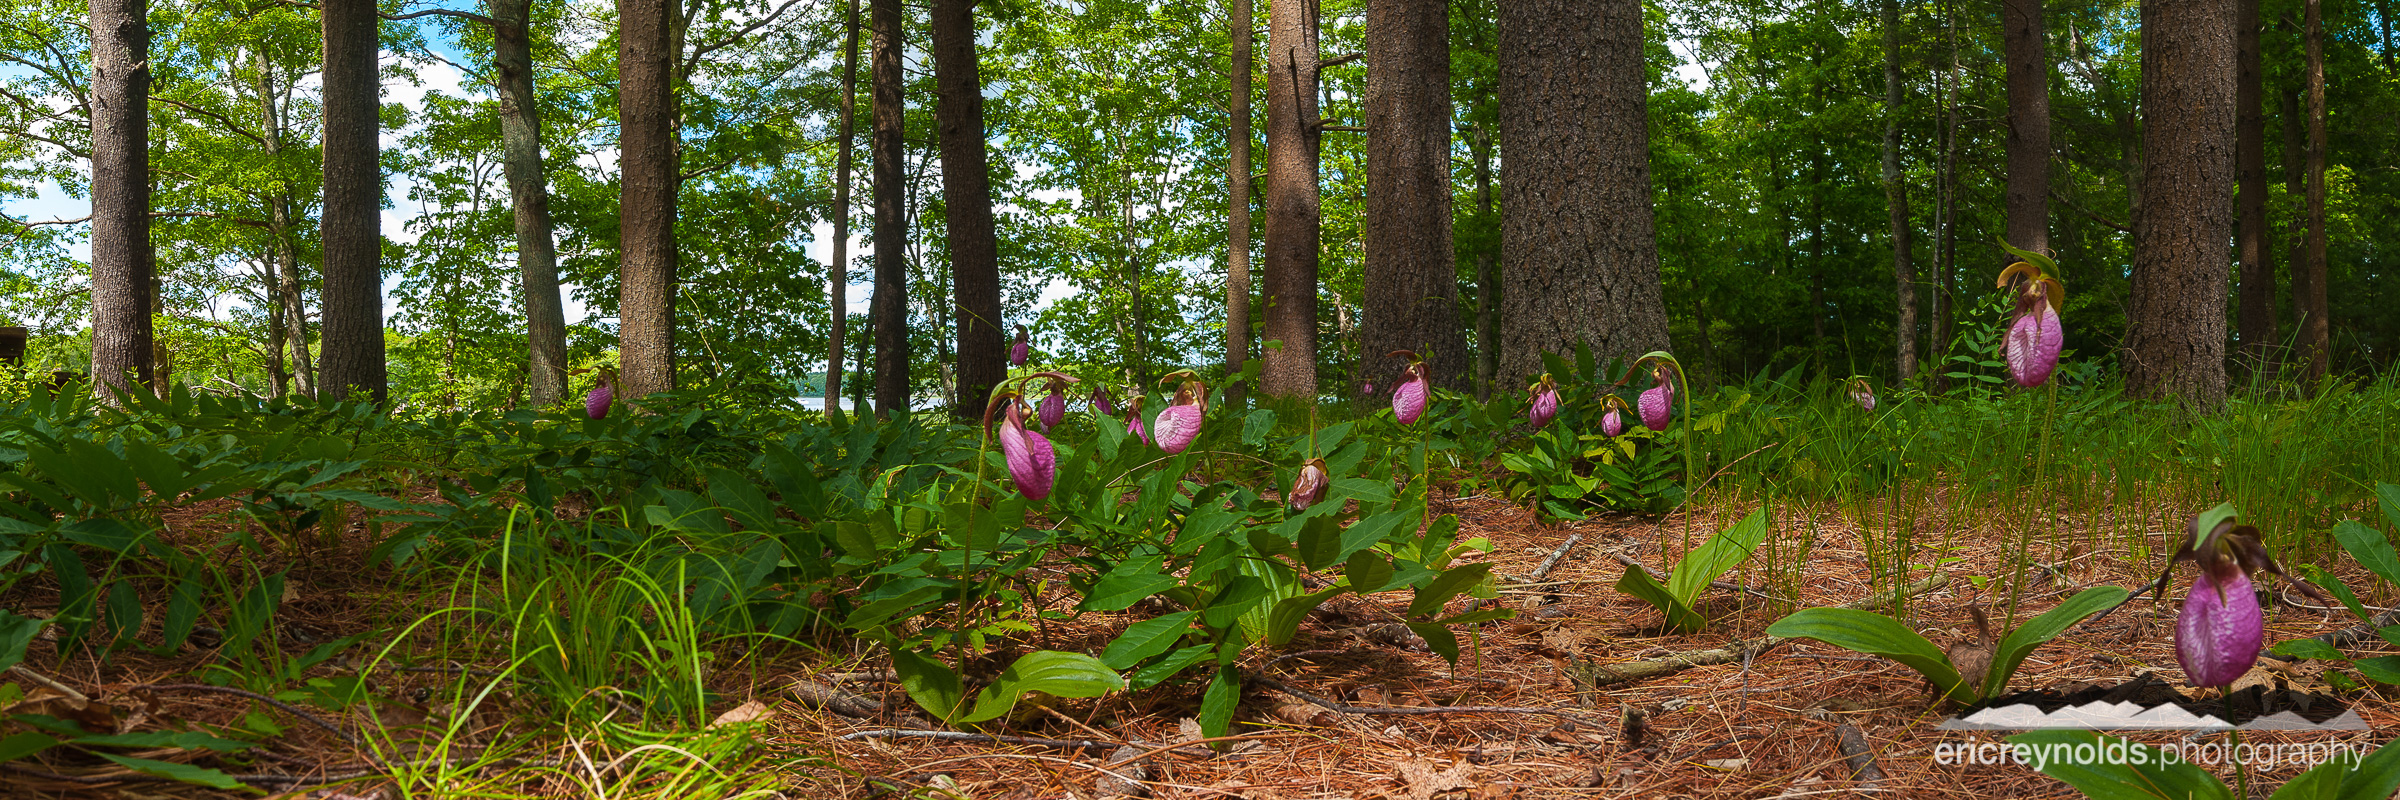 Lady Slippers by Eric Reynolds - Landscape Photographer